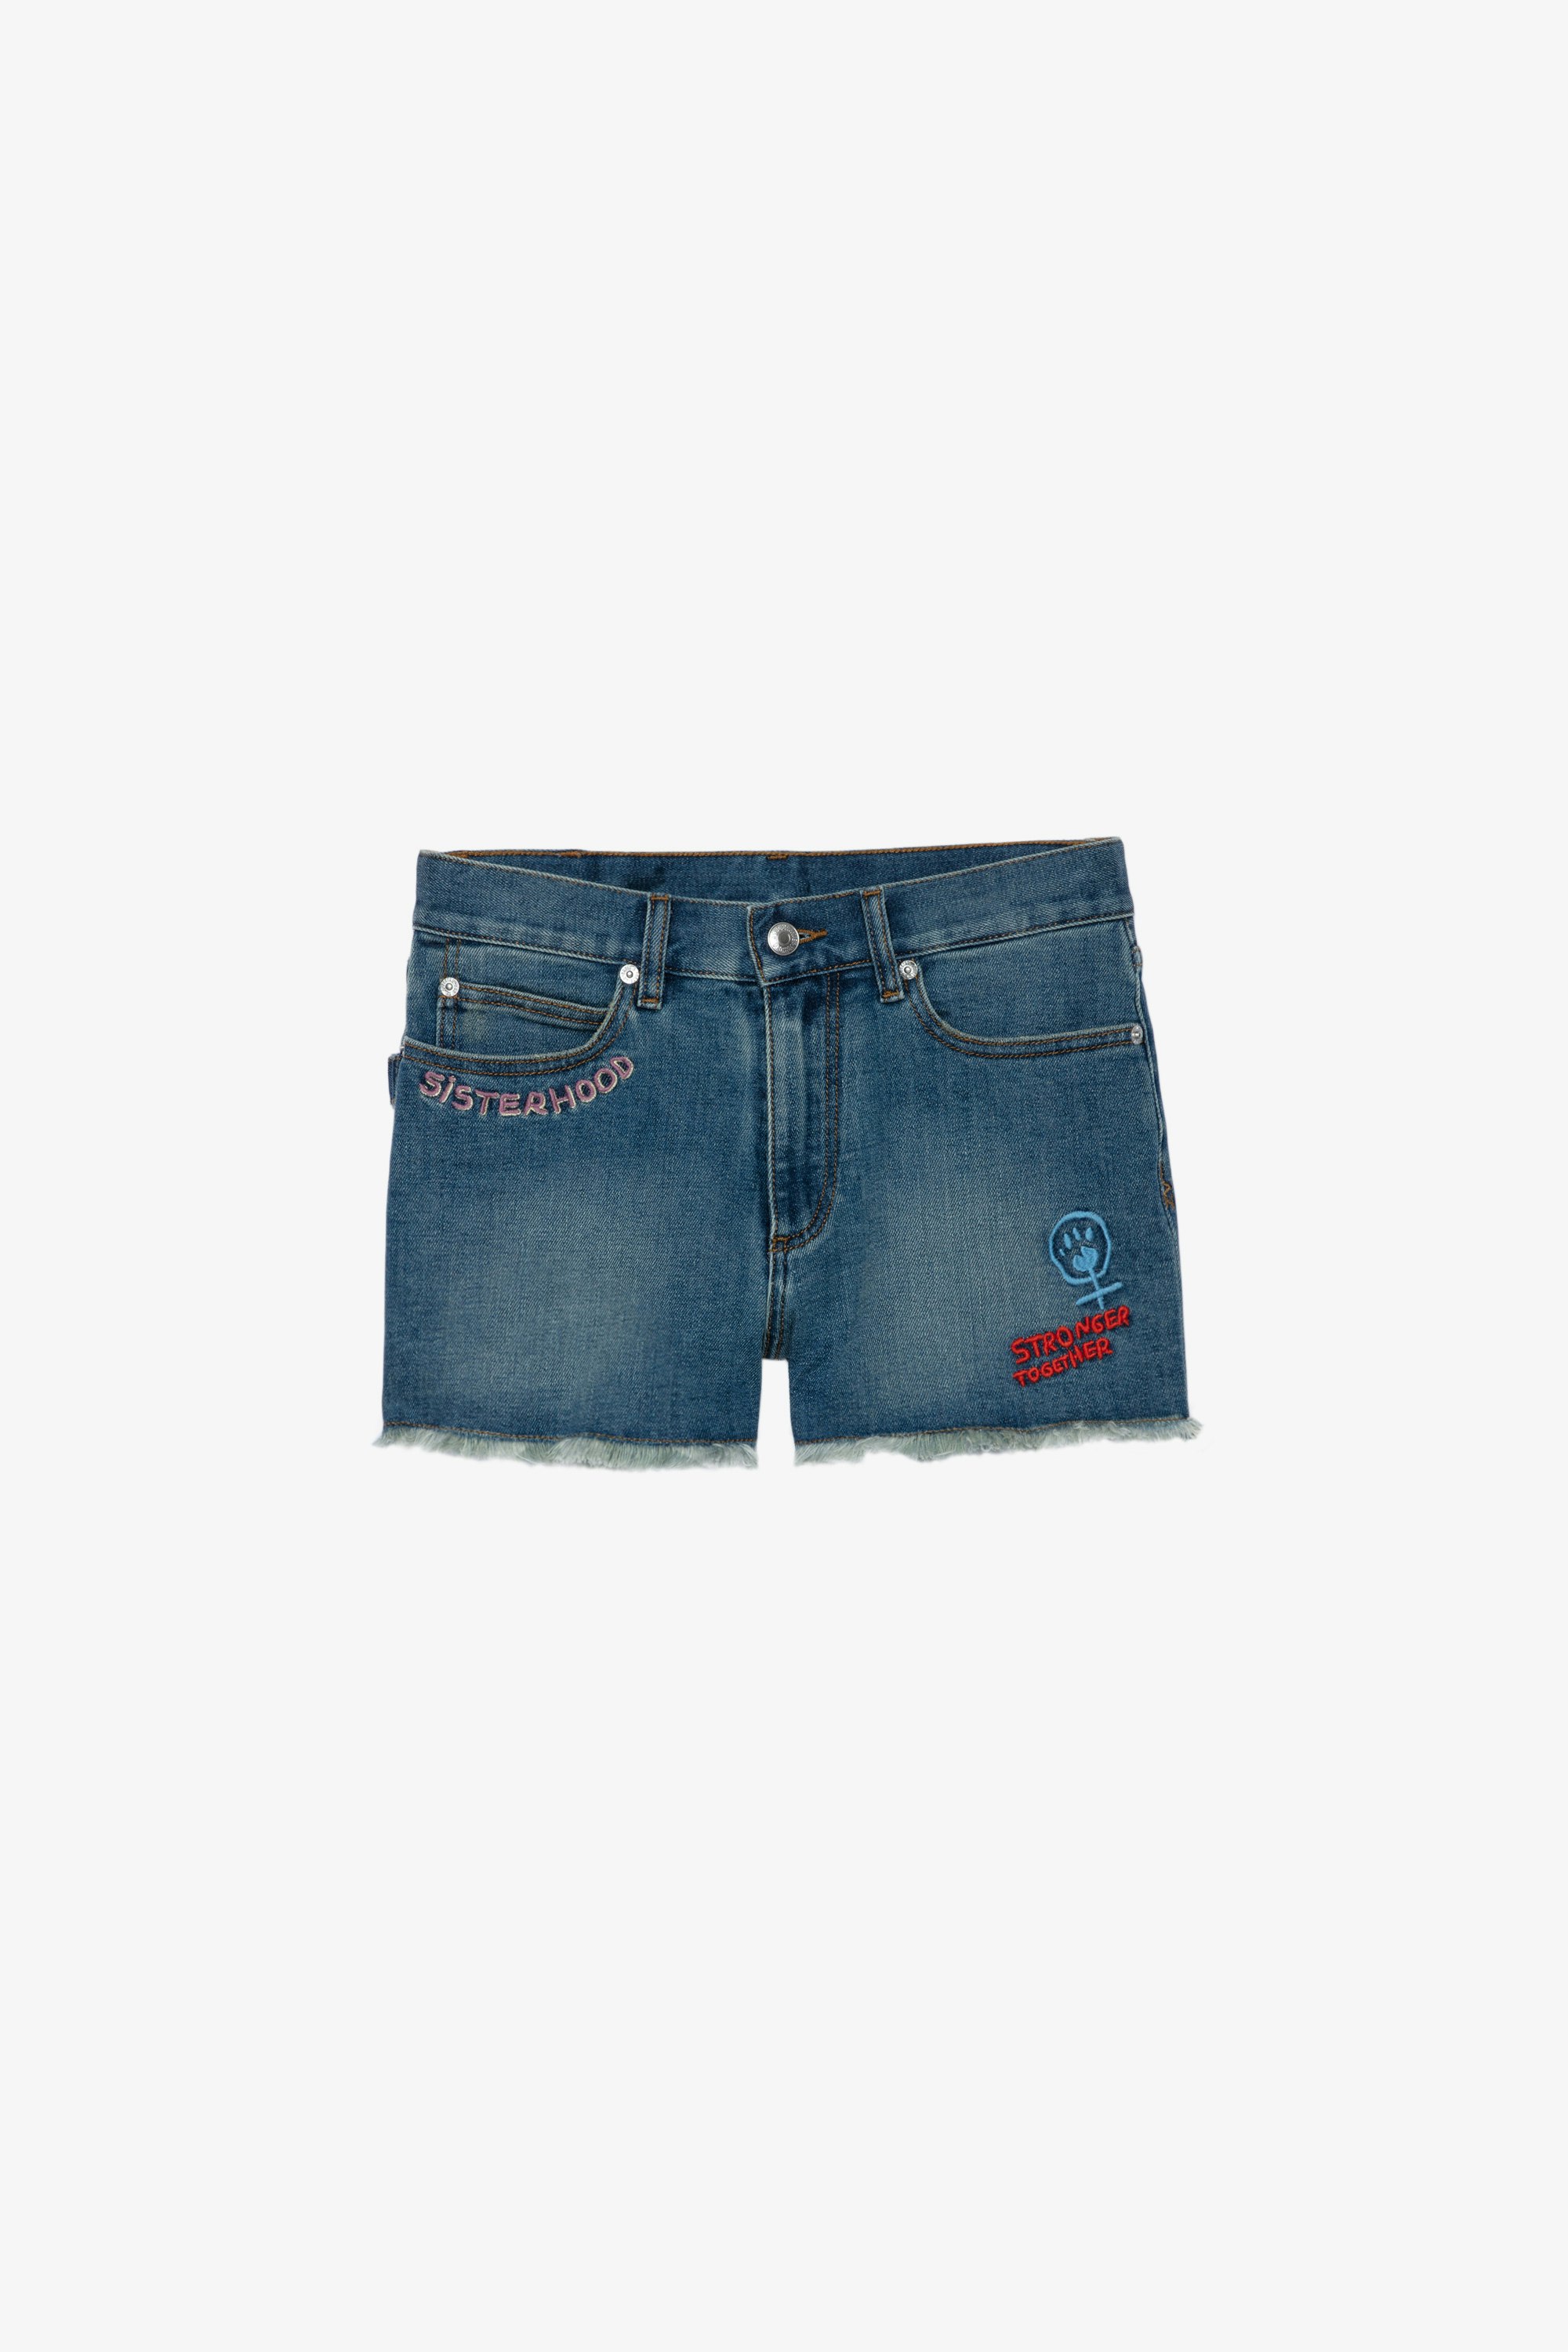 Shorts Storm Band of Sisters Jeansshorts für Damen mit Band-of-Sisters-Stickereien